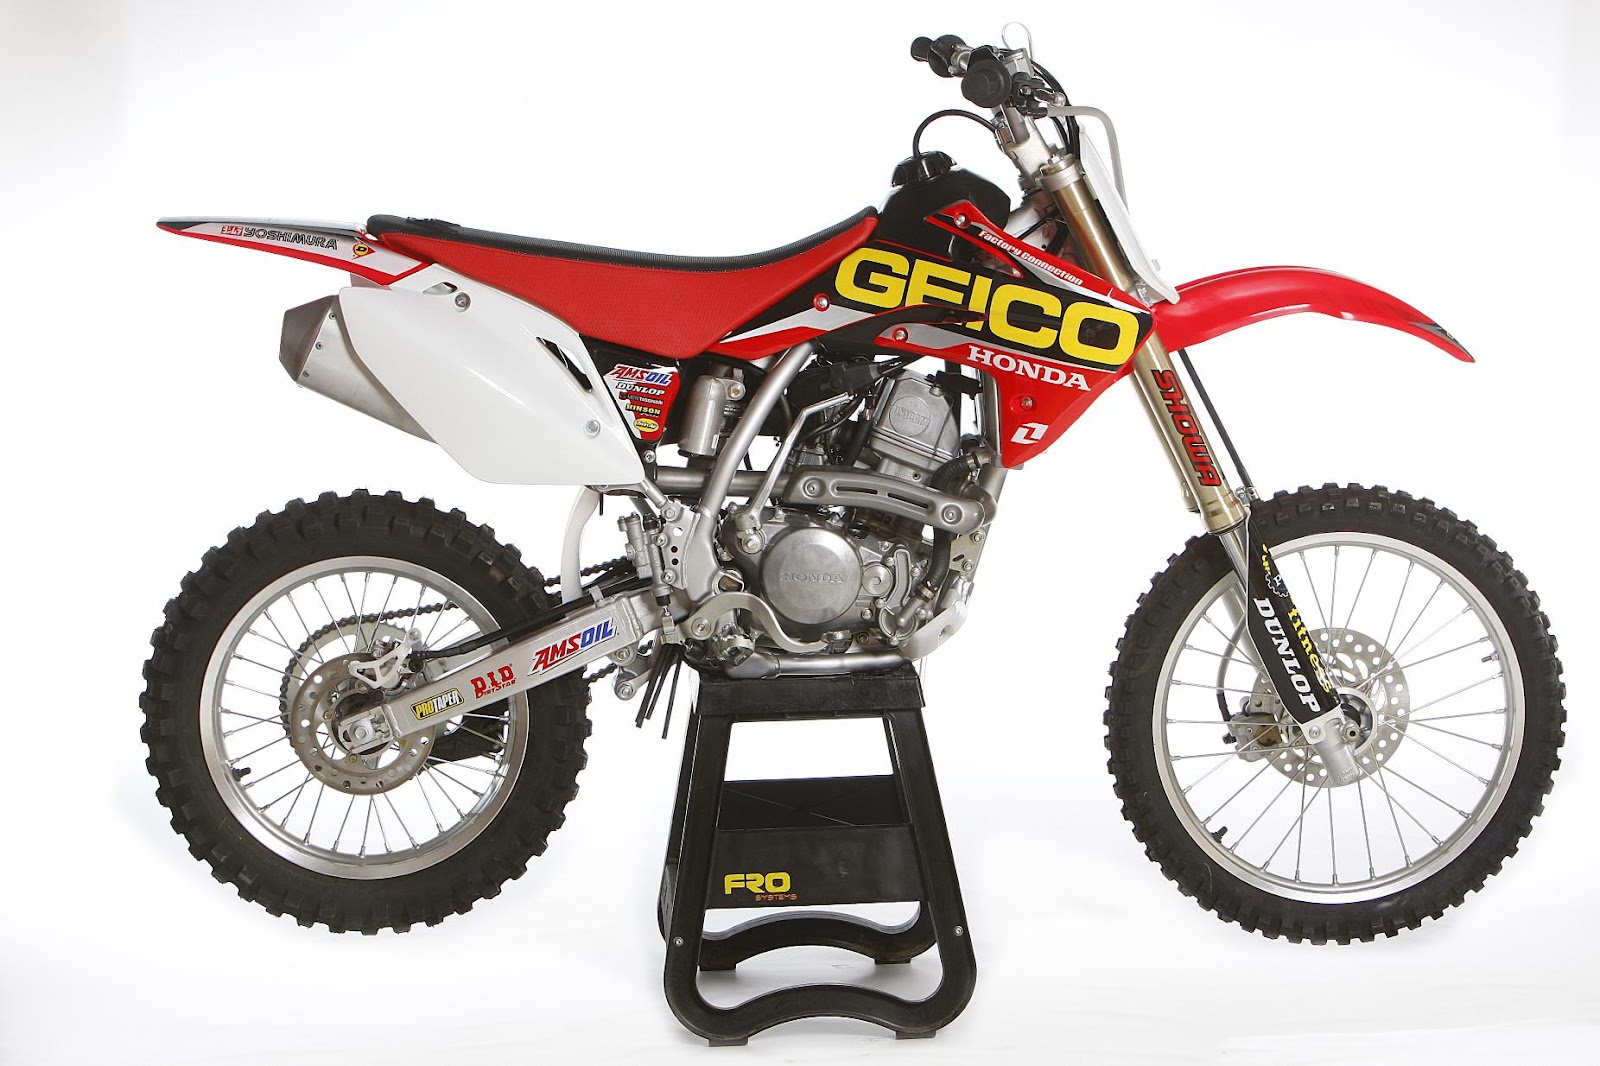 Cat Auto: SPECIAL EDITION CRF MODELS RELEASED FOR 2013